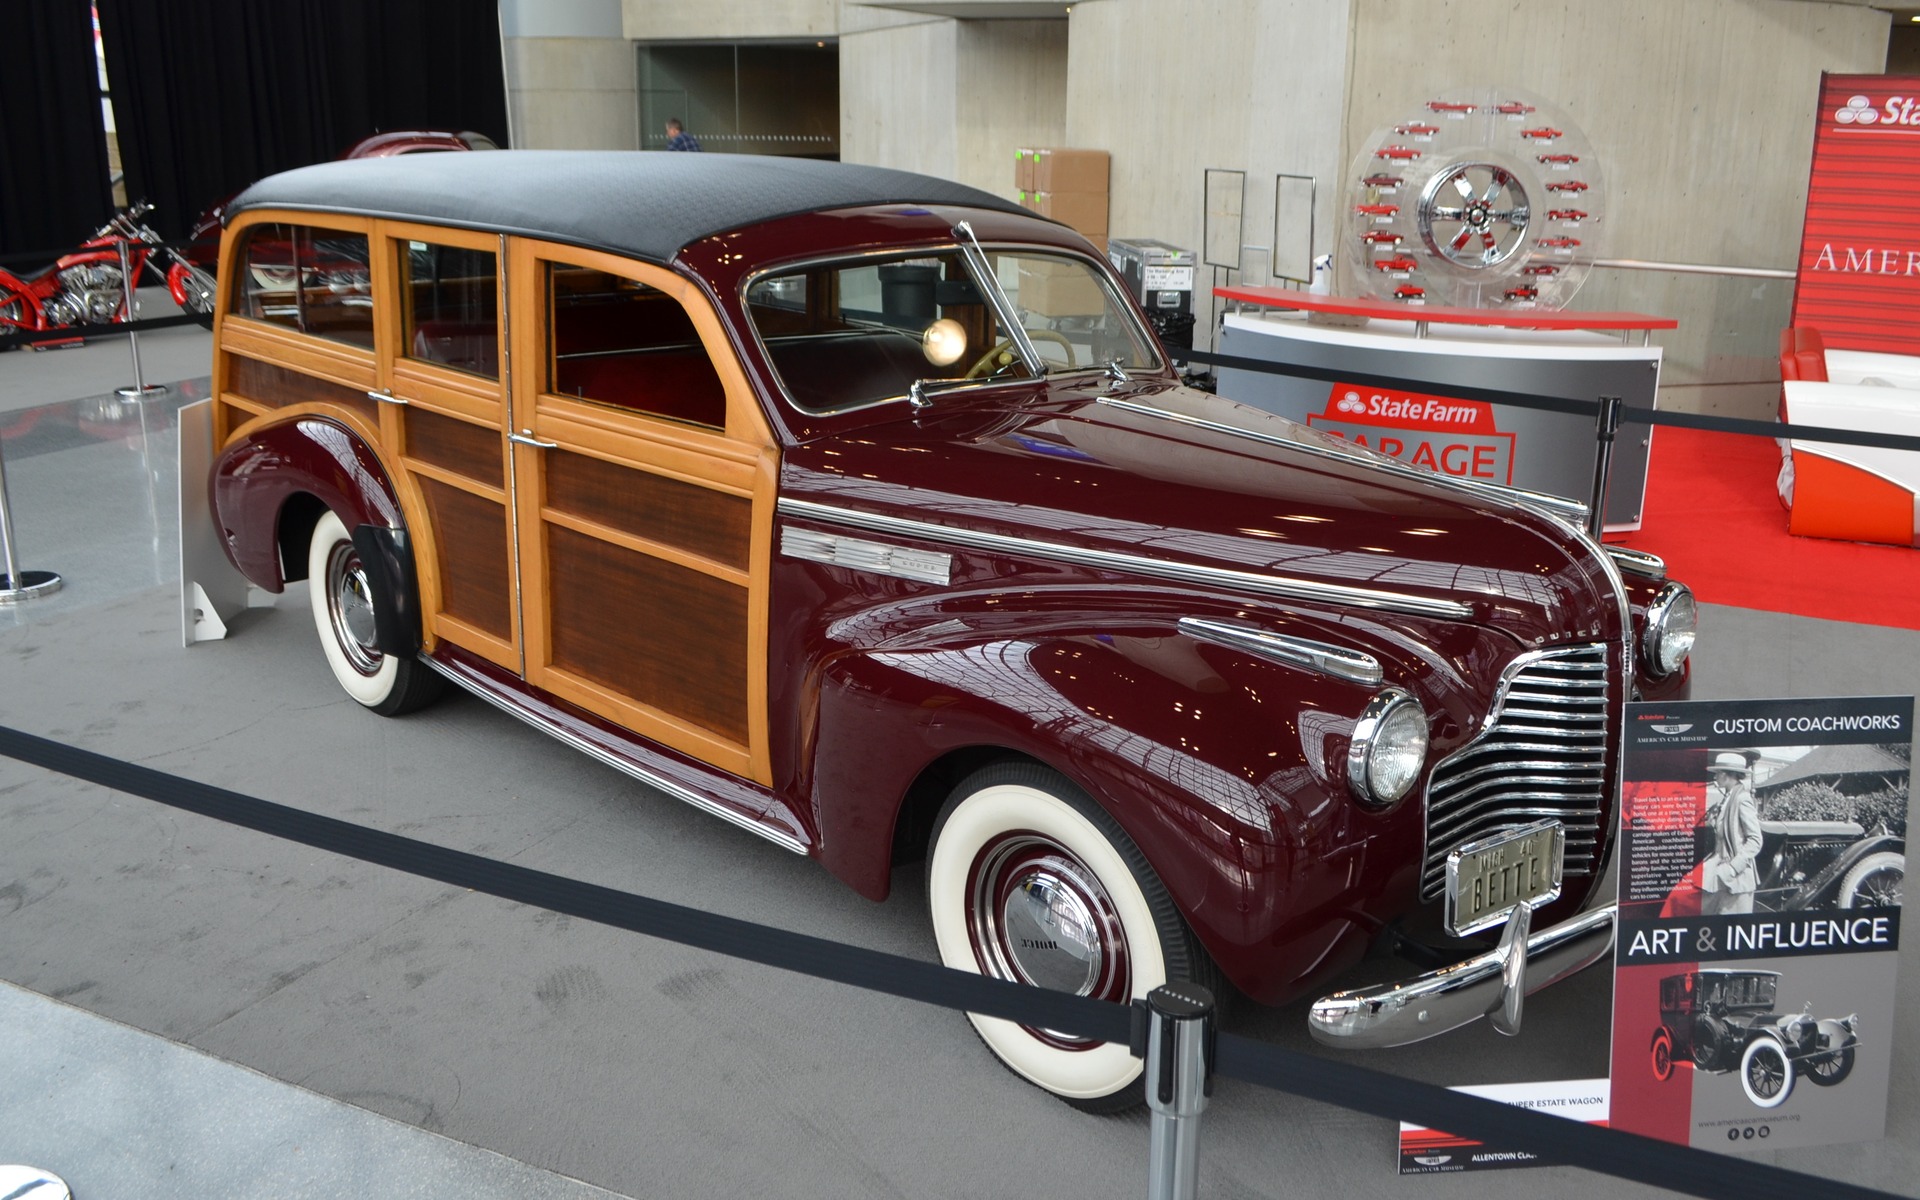 1940 Buick Super Estate Wagon. The perfect woodie!